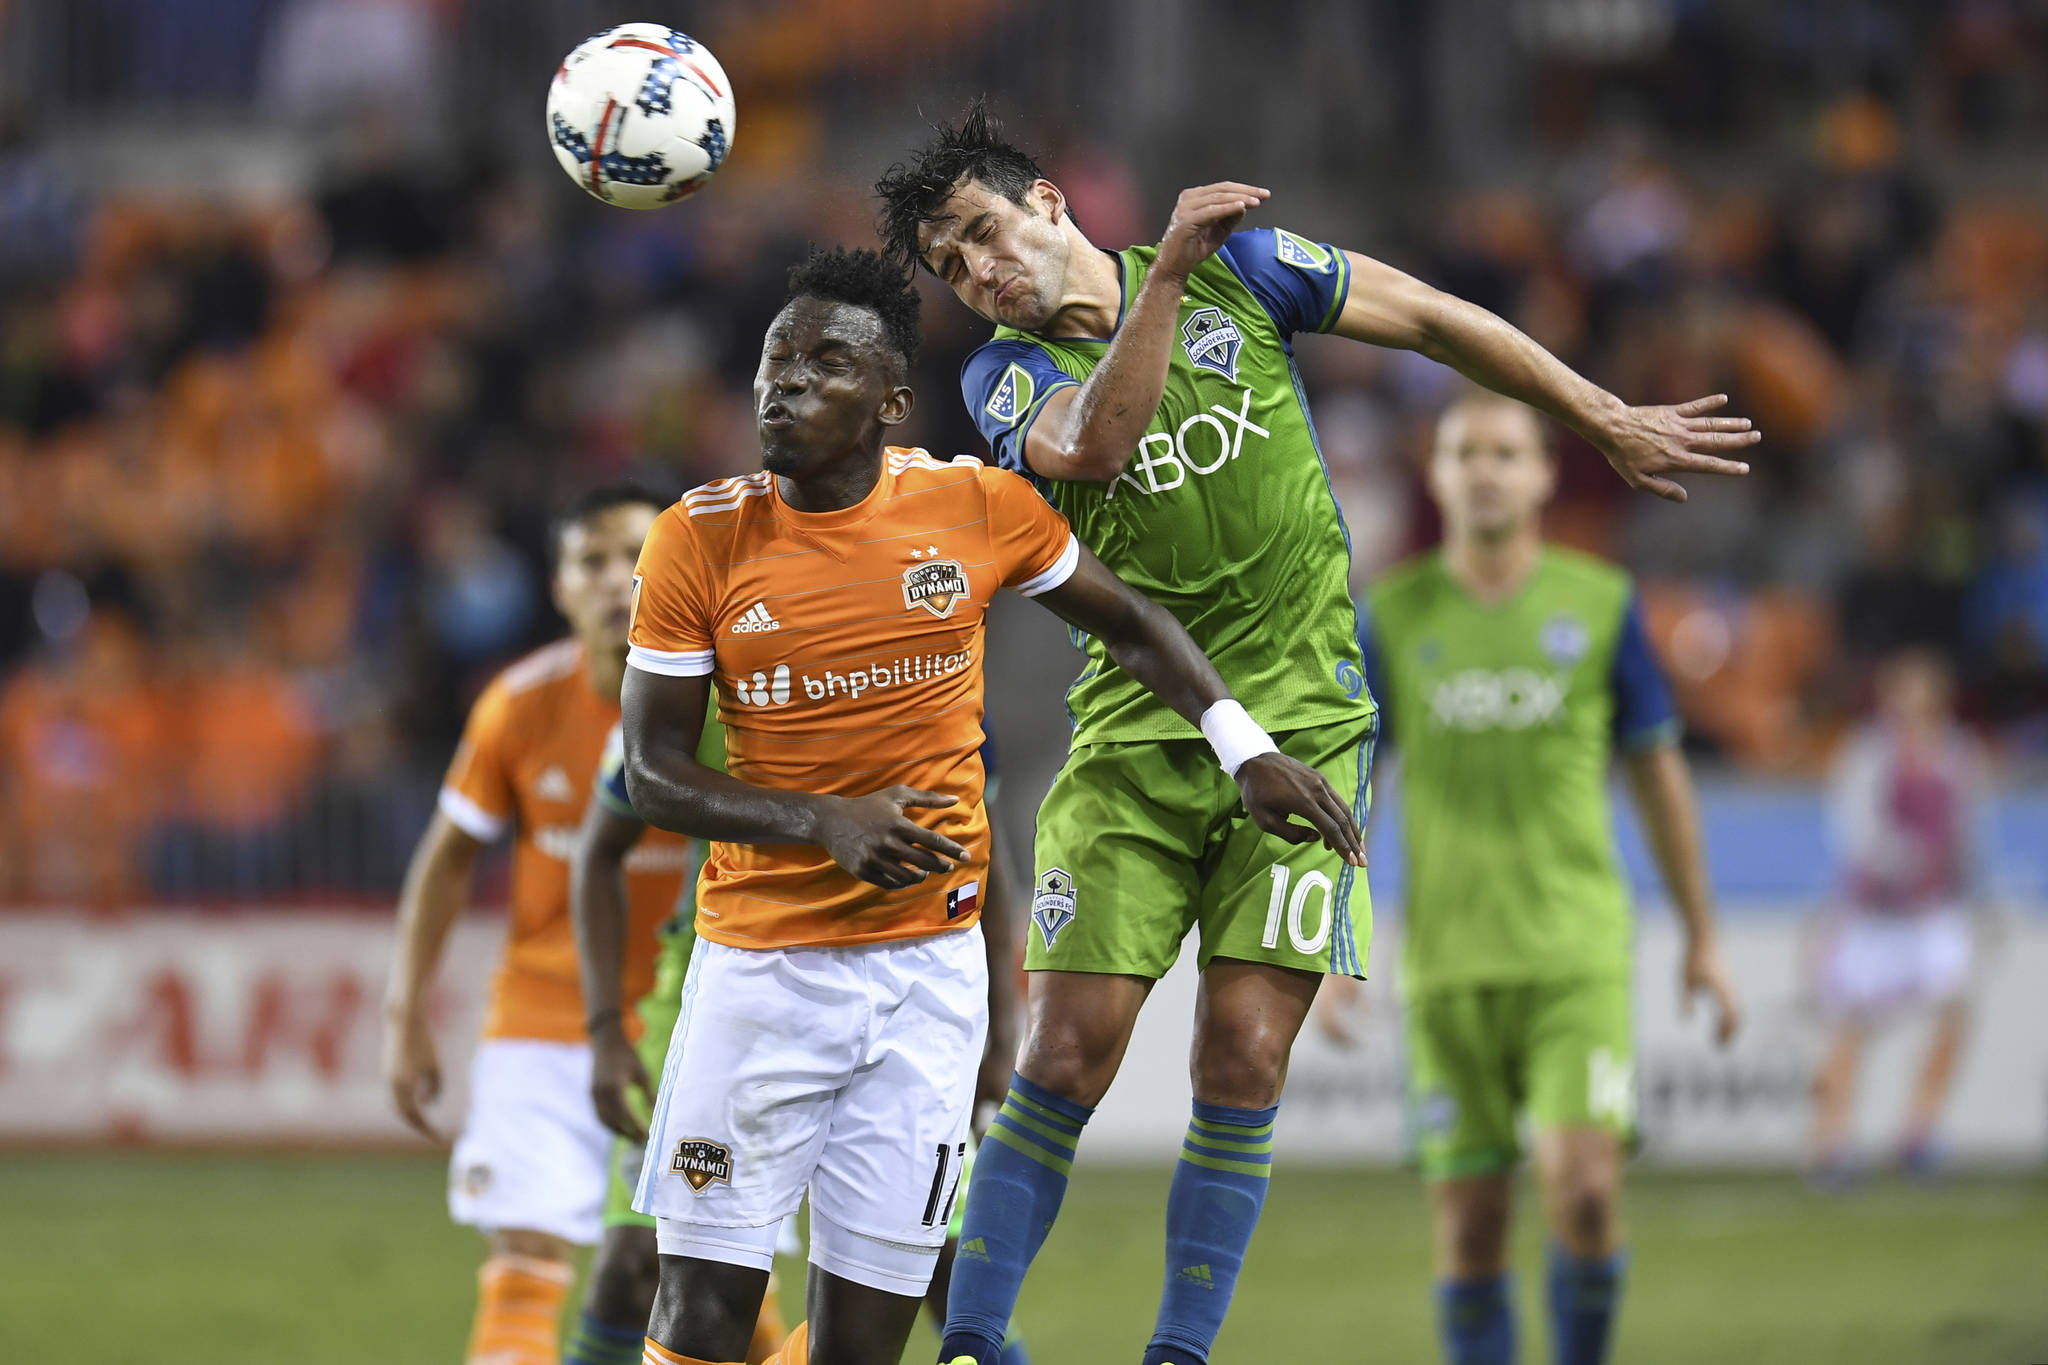 (Trask Smith | Sounders FC Communications) Seattle Sounders FC midfielder Nico Lodeiro goes up to head the ball against Houston Dynamo’s Romell Quioto on Saturday.